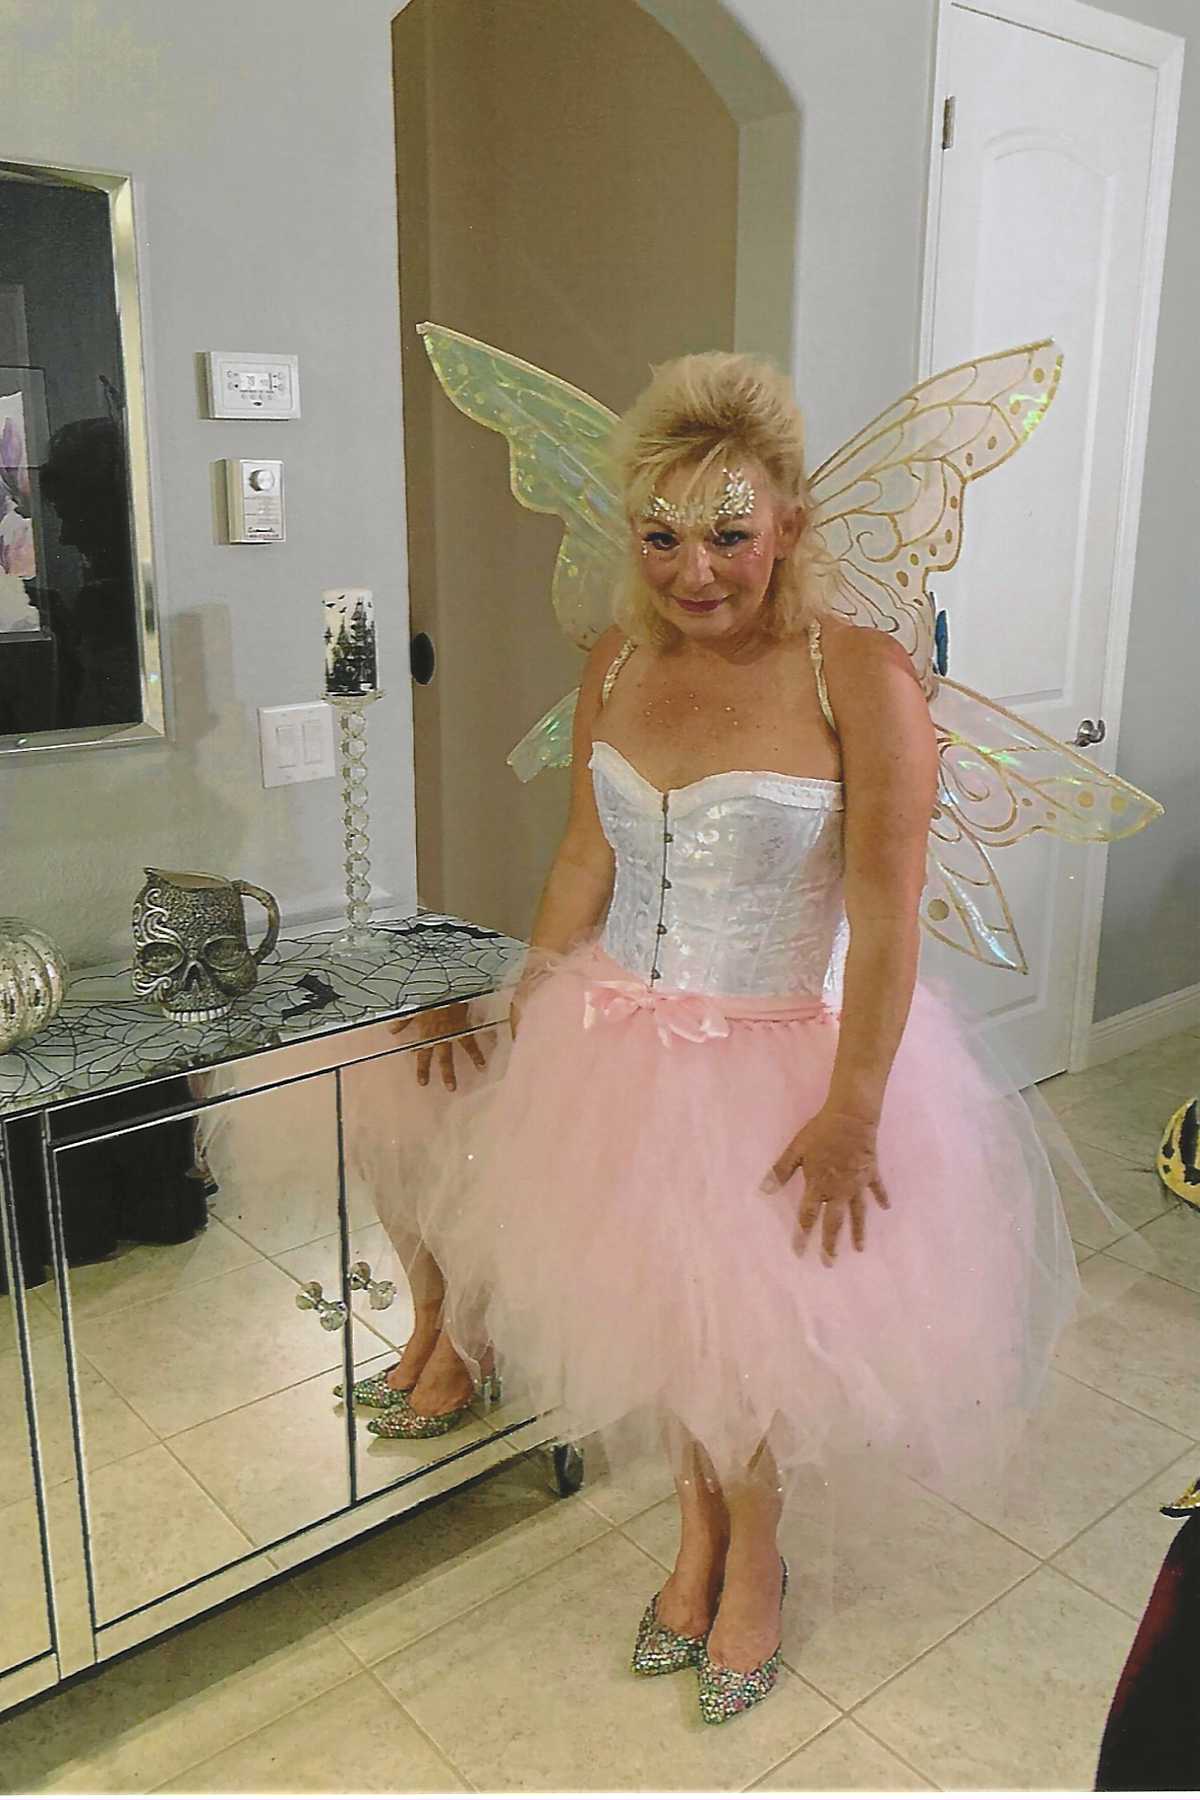 Halloween won't be the same without my Tinkerbell.